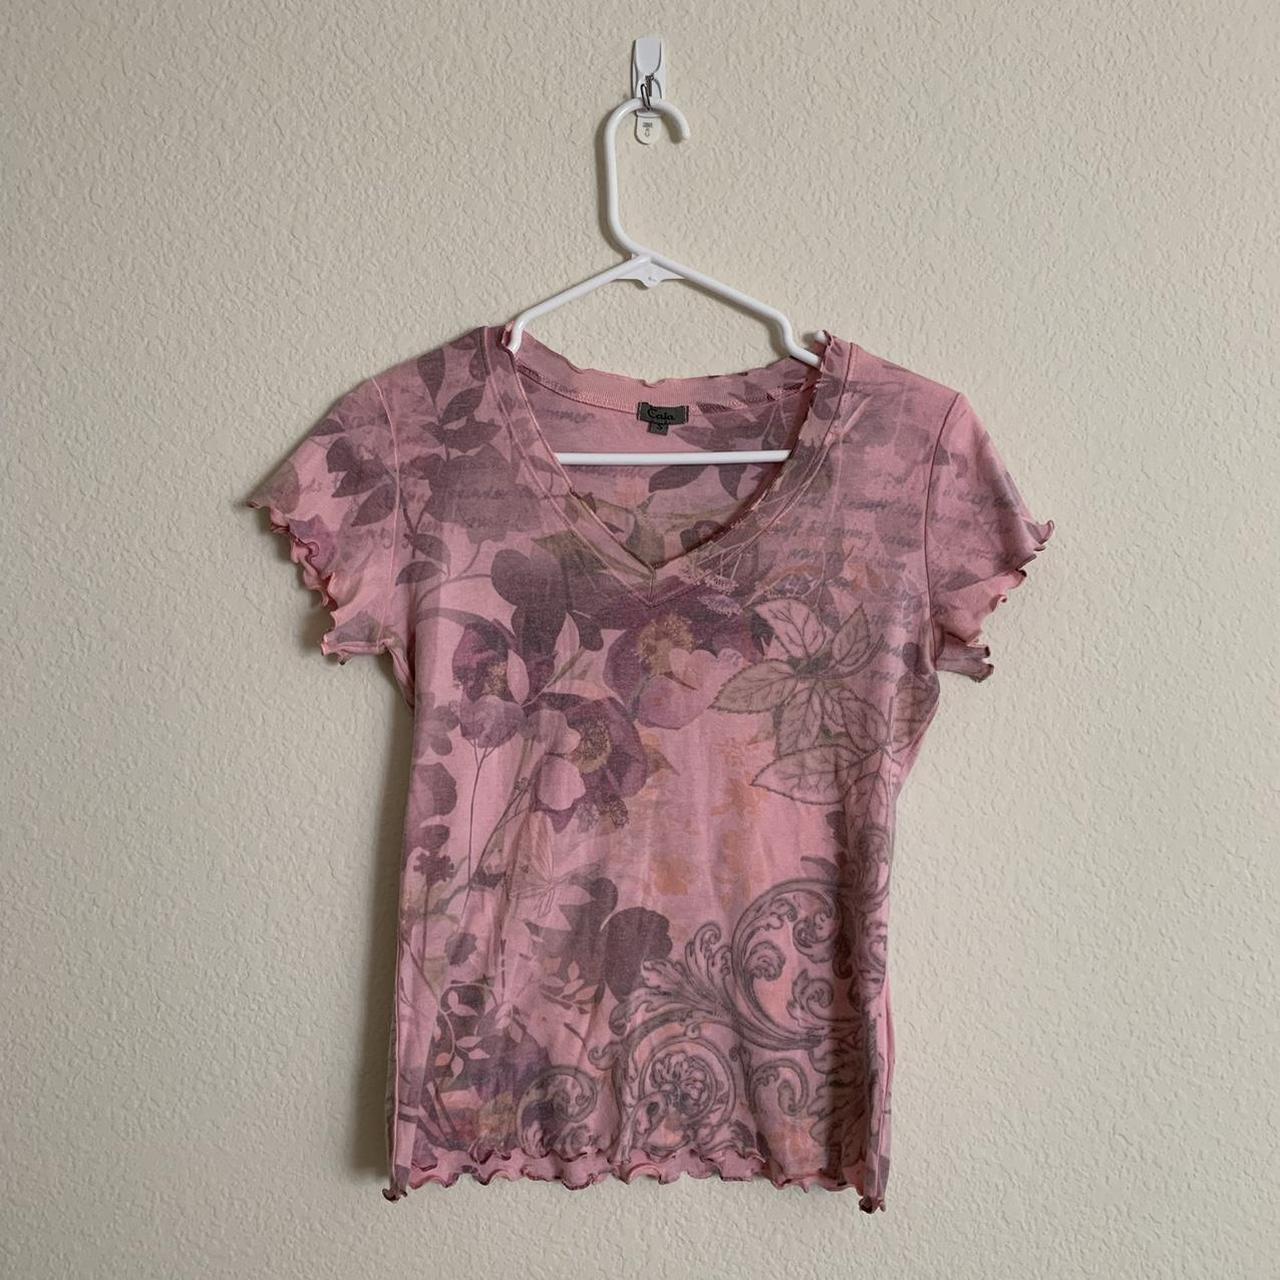 Product Image 1 - CAIA

Vintage 90s abstract floral graphic